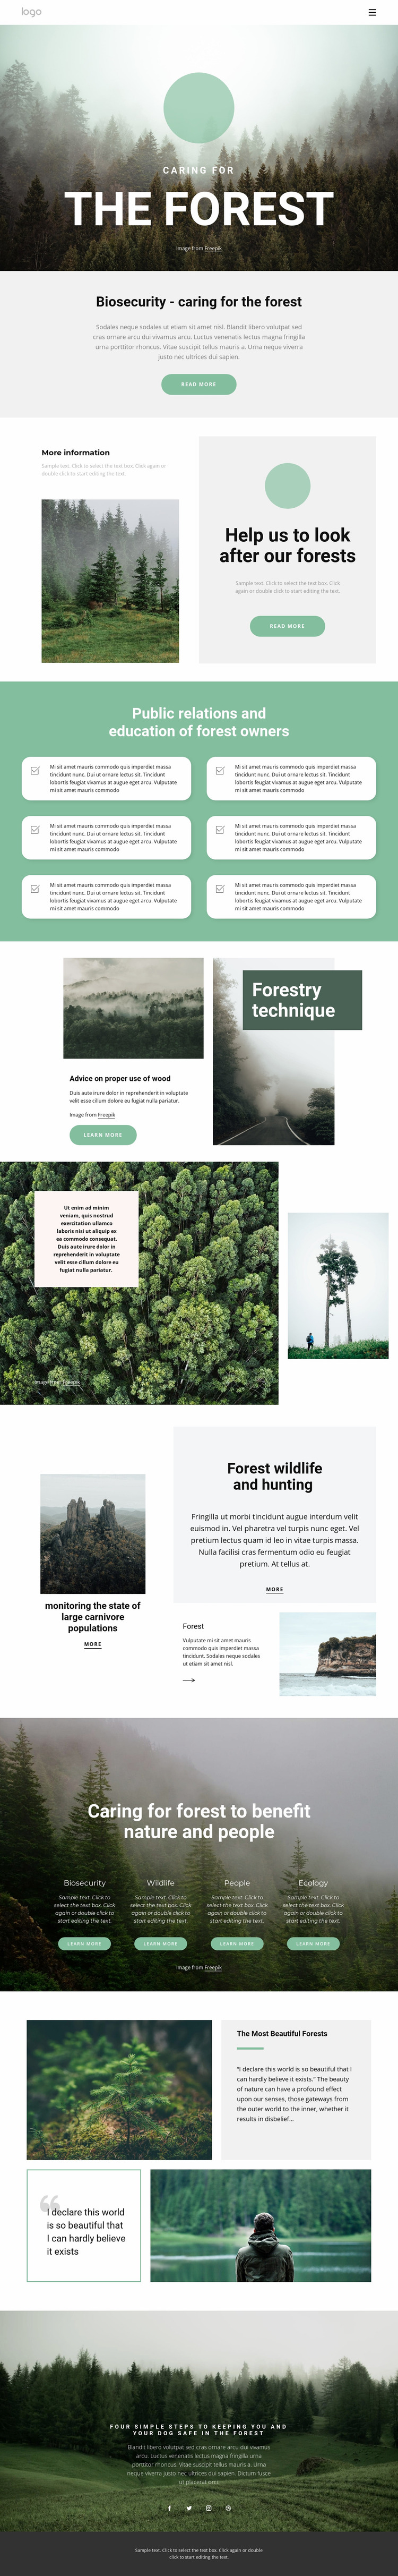 Caring for parks and forests Website Mockup